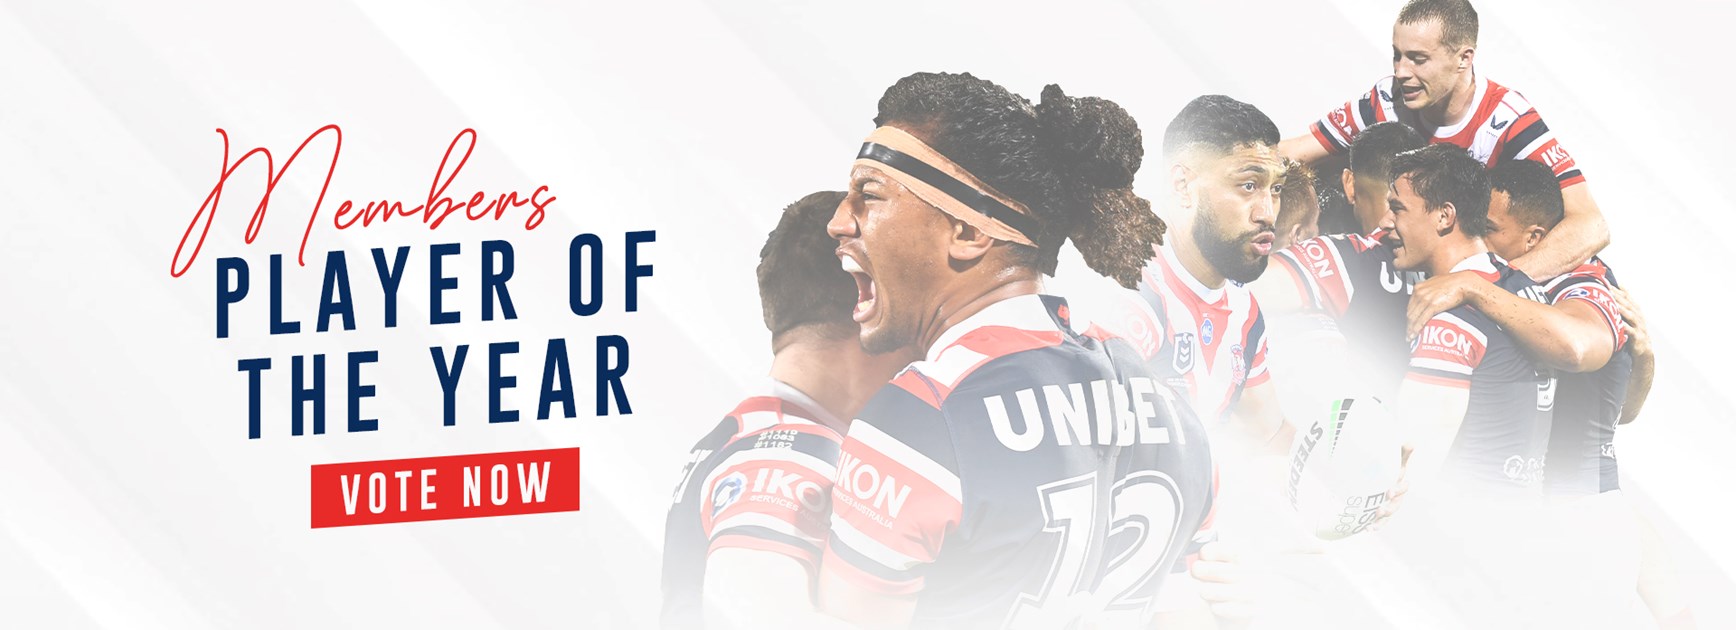 2021 Red Rooster Members Player of the Year Voting Now CLOSED